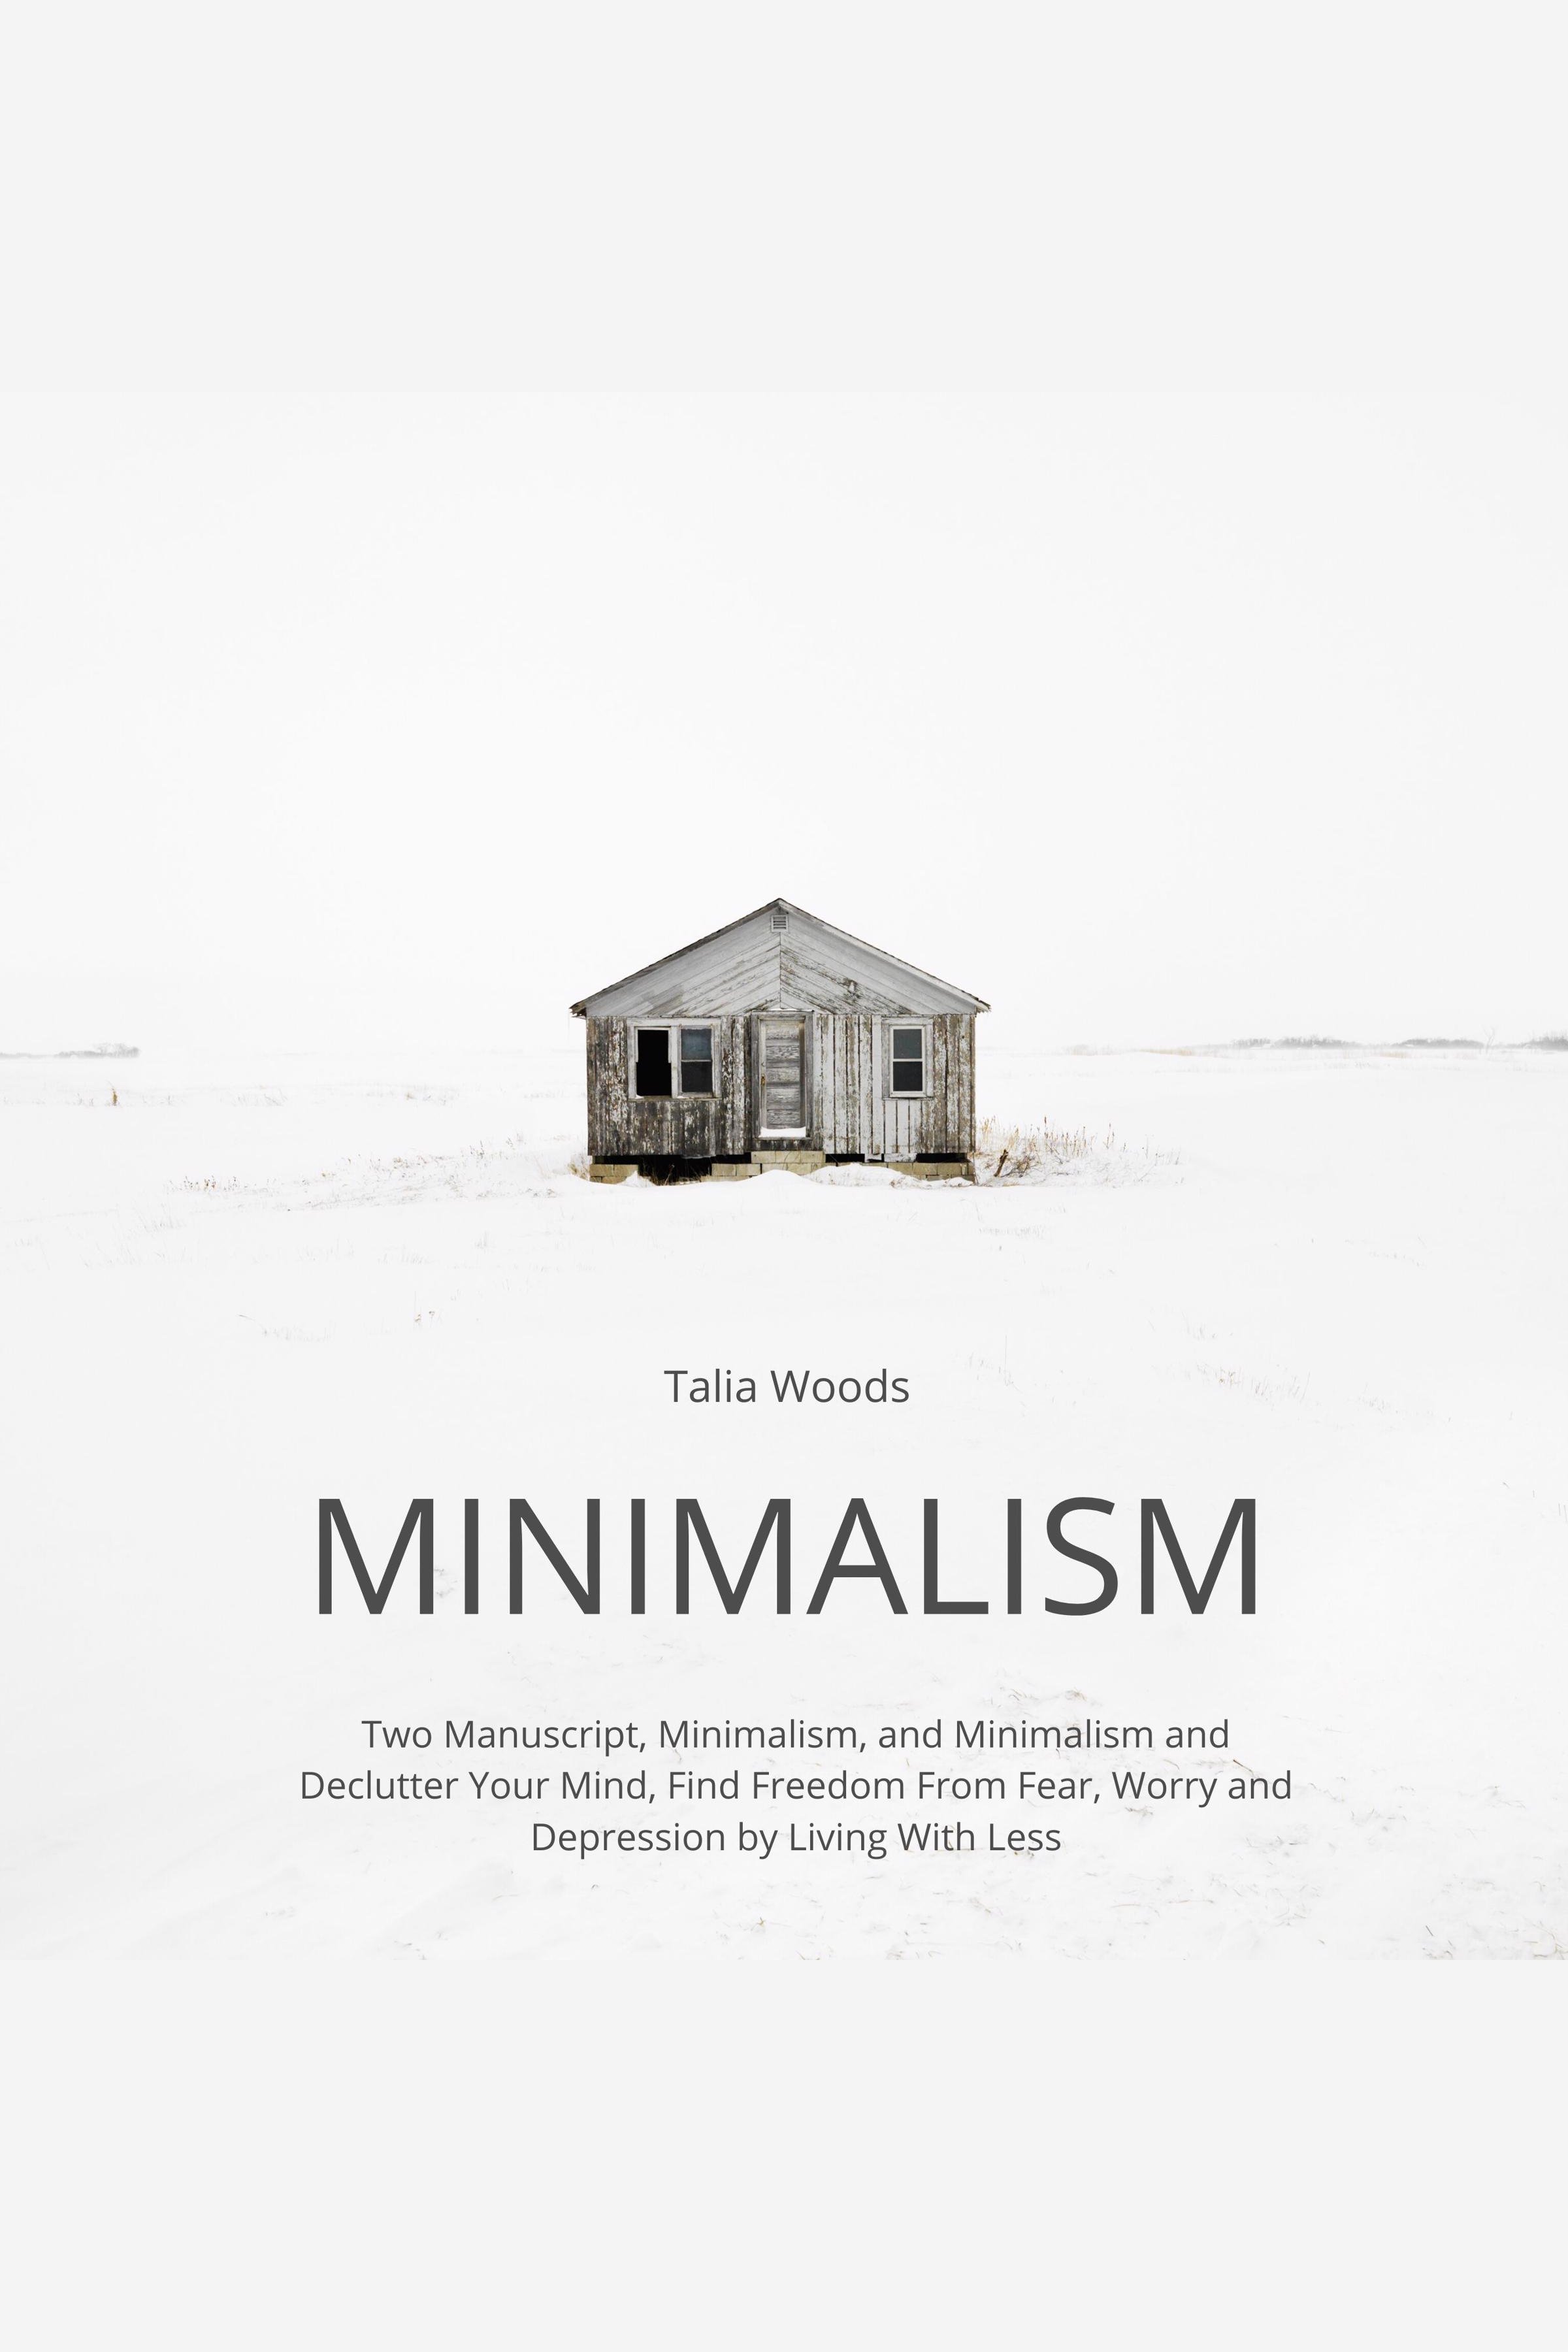 Minimalism Two Manuscript, Minimalism, and Minimalism and Declutter Your Mind, Find Freedom From Fear, Worry and Depression by Living With Less cover image